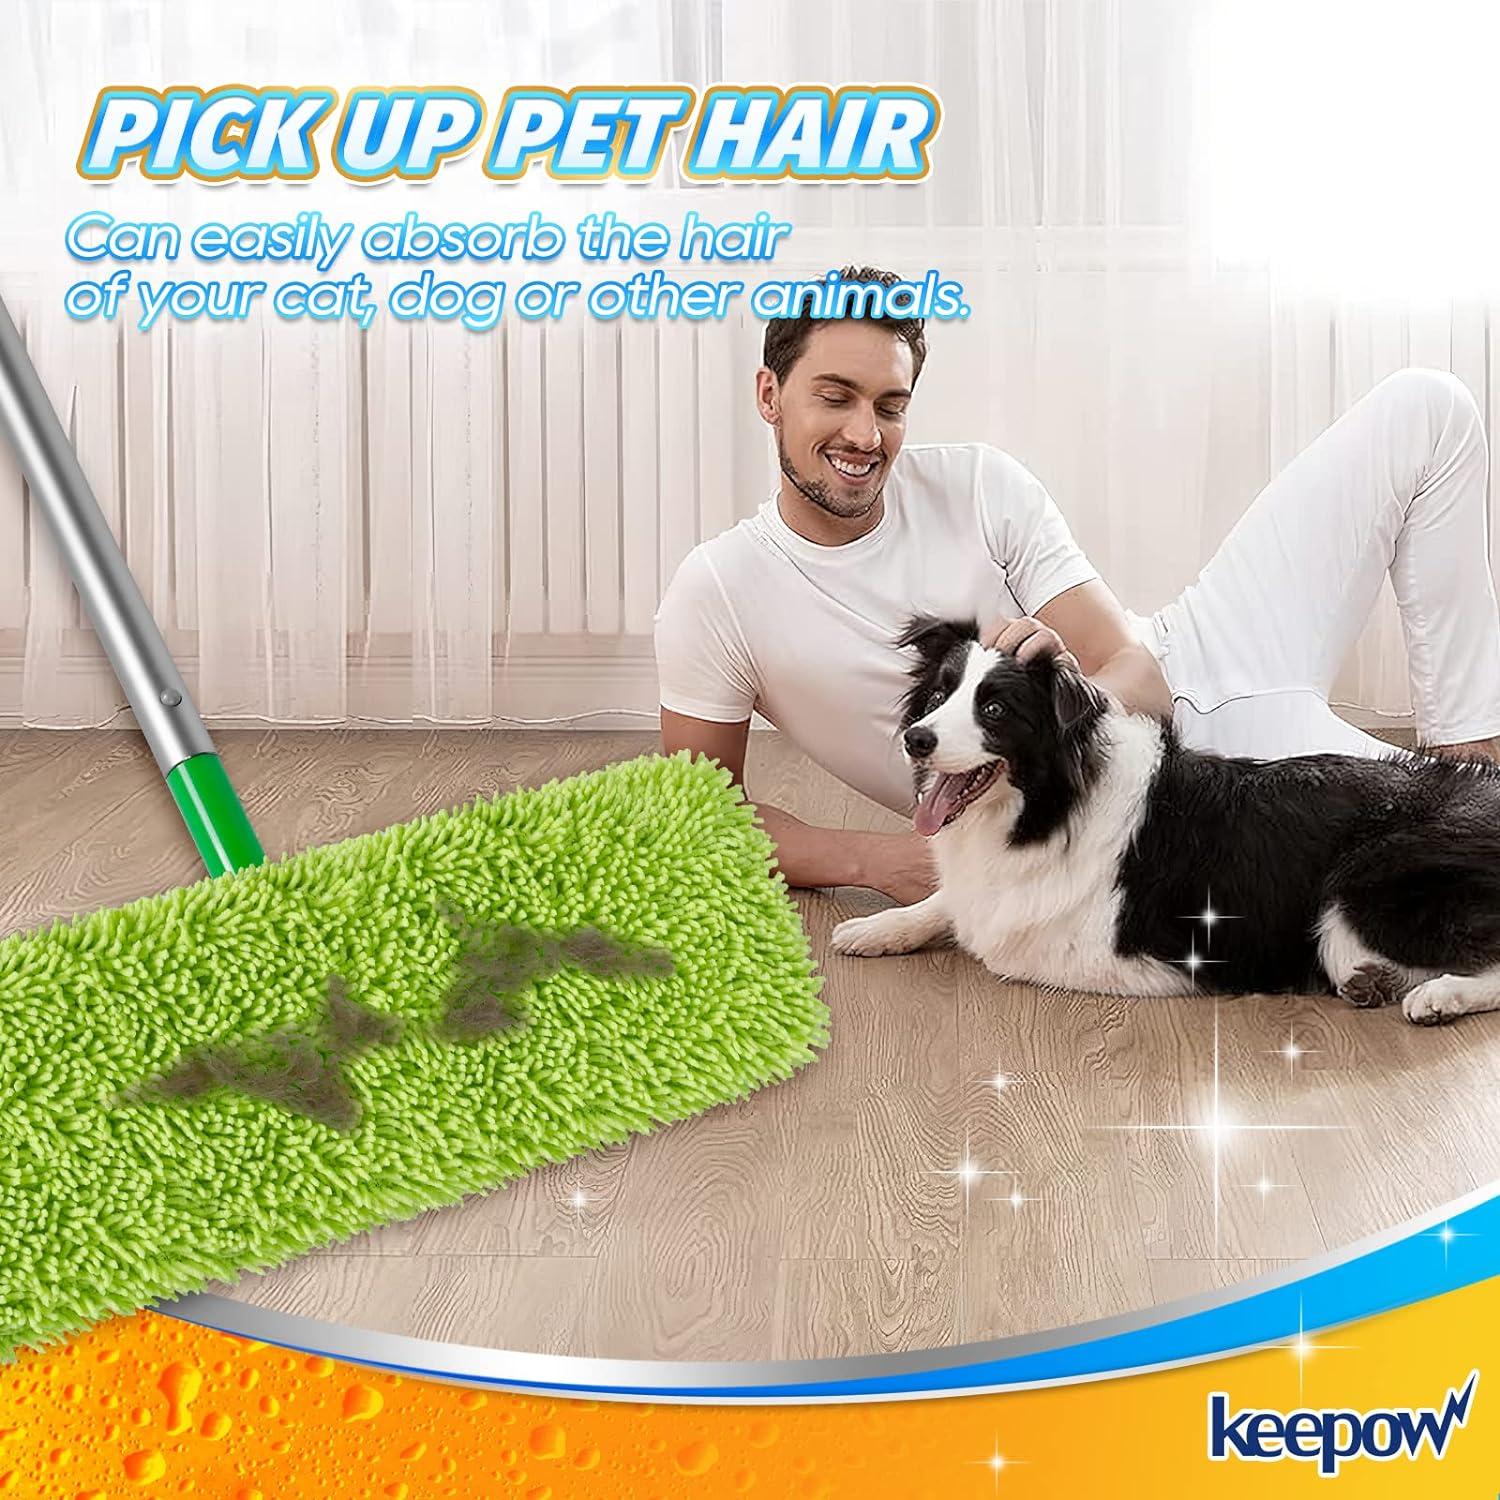 6 Washable/Reusable Microfiber Mop Pads Compatible With Swiffer